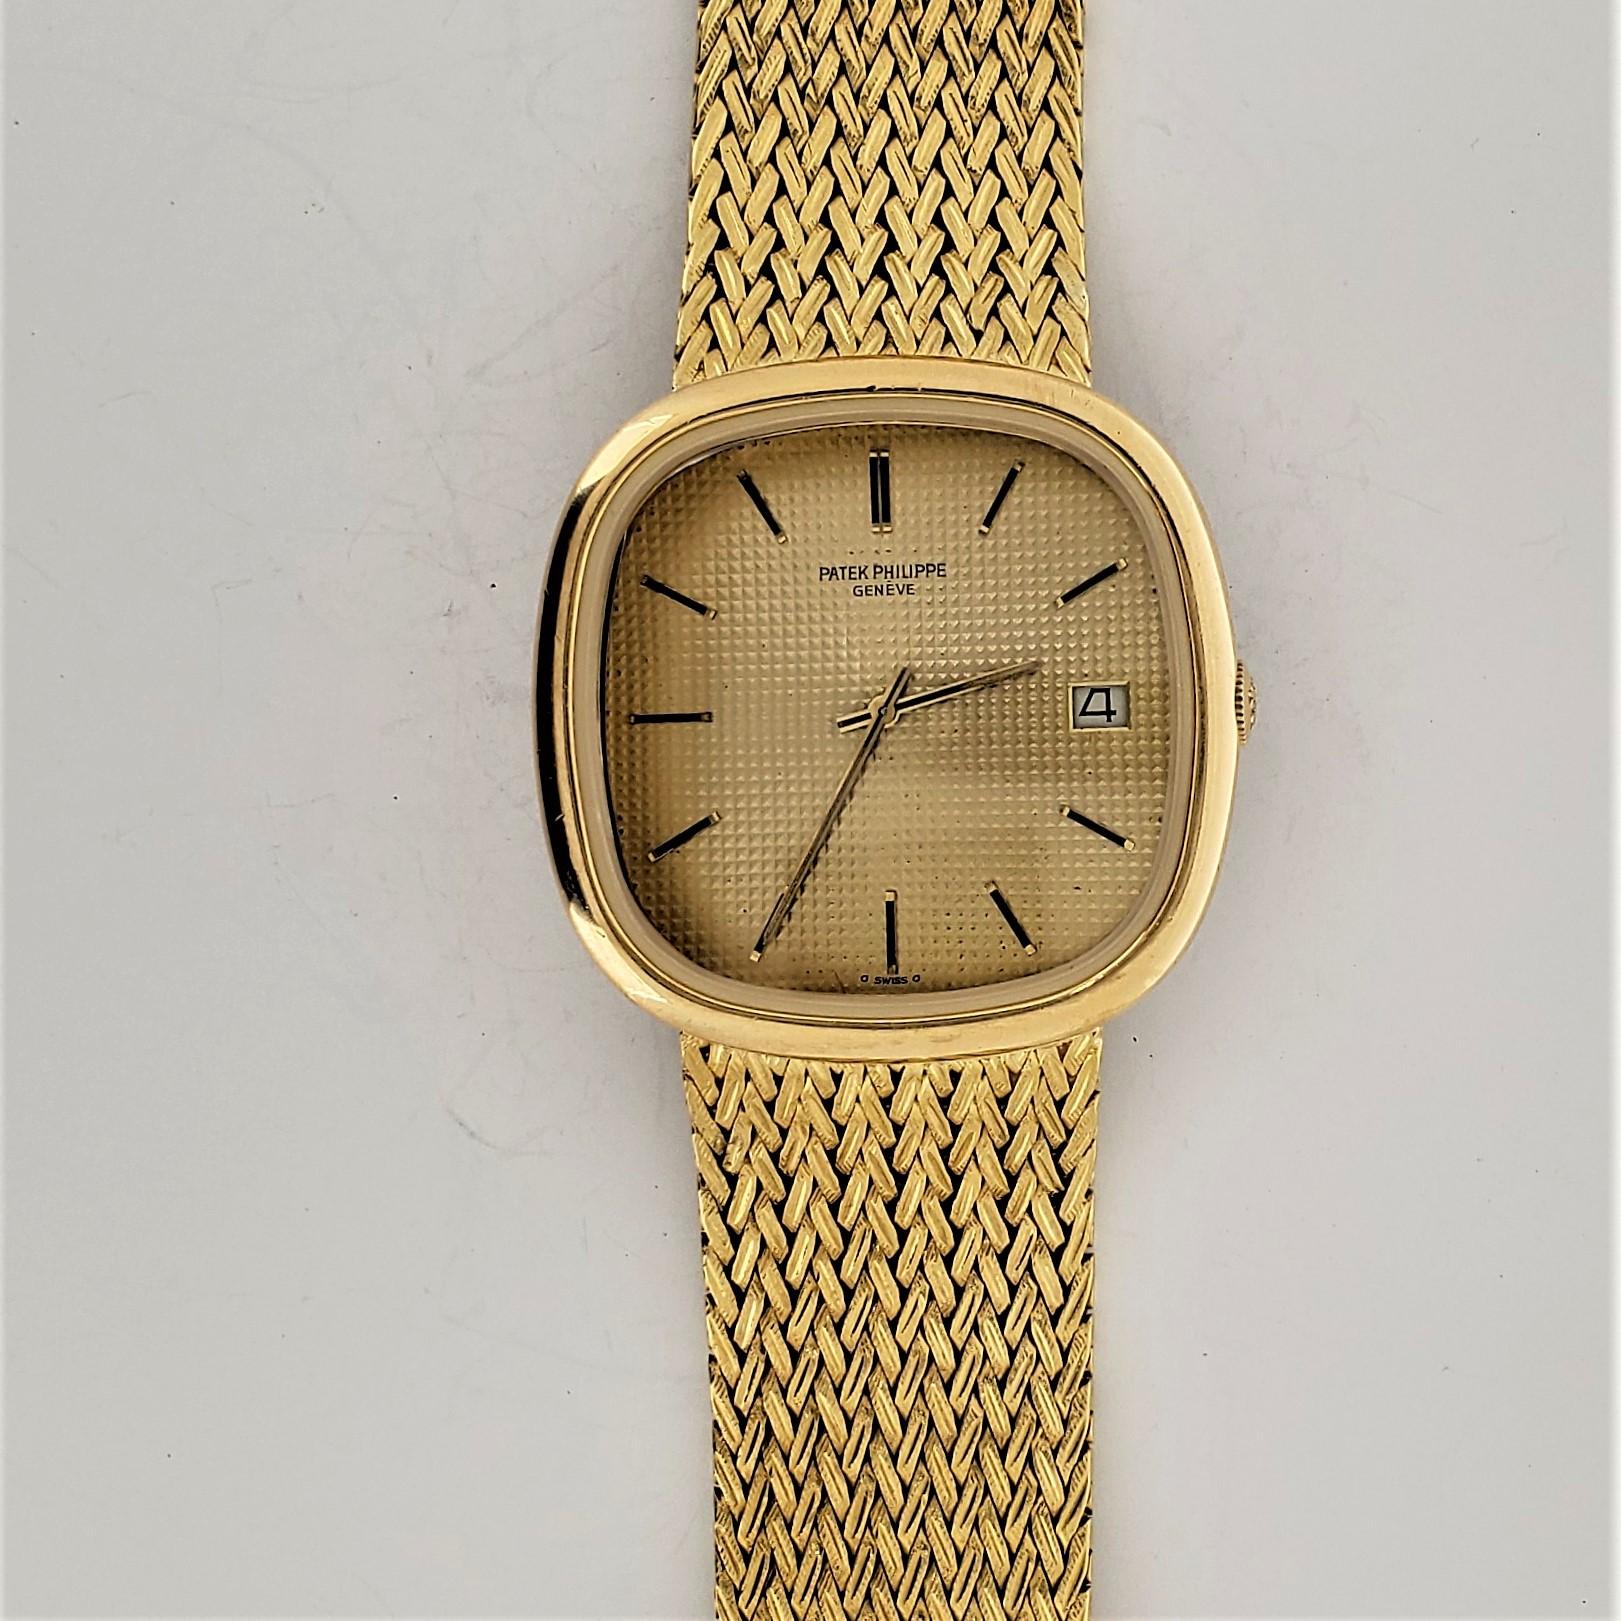 Patek Philippe 3604/2 Cushion shape Automatic winding 18 karat gold bracelet watch,  The watch measures 36 x 35 mm with a attached Patek herringbone pattern bracelet measuring 8 inches long (20 cm).  The dial has a hobnail design and is made also of